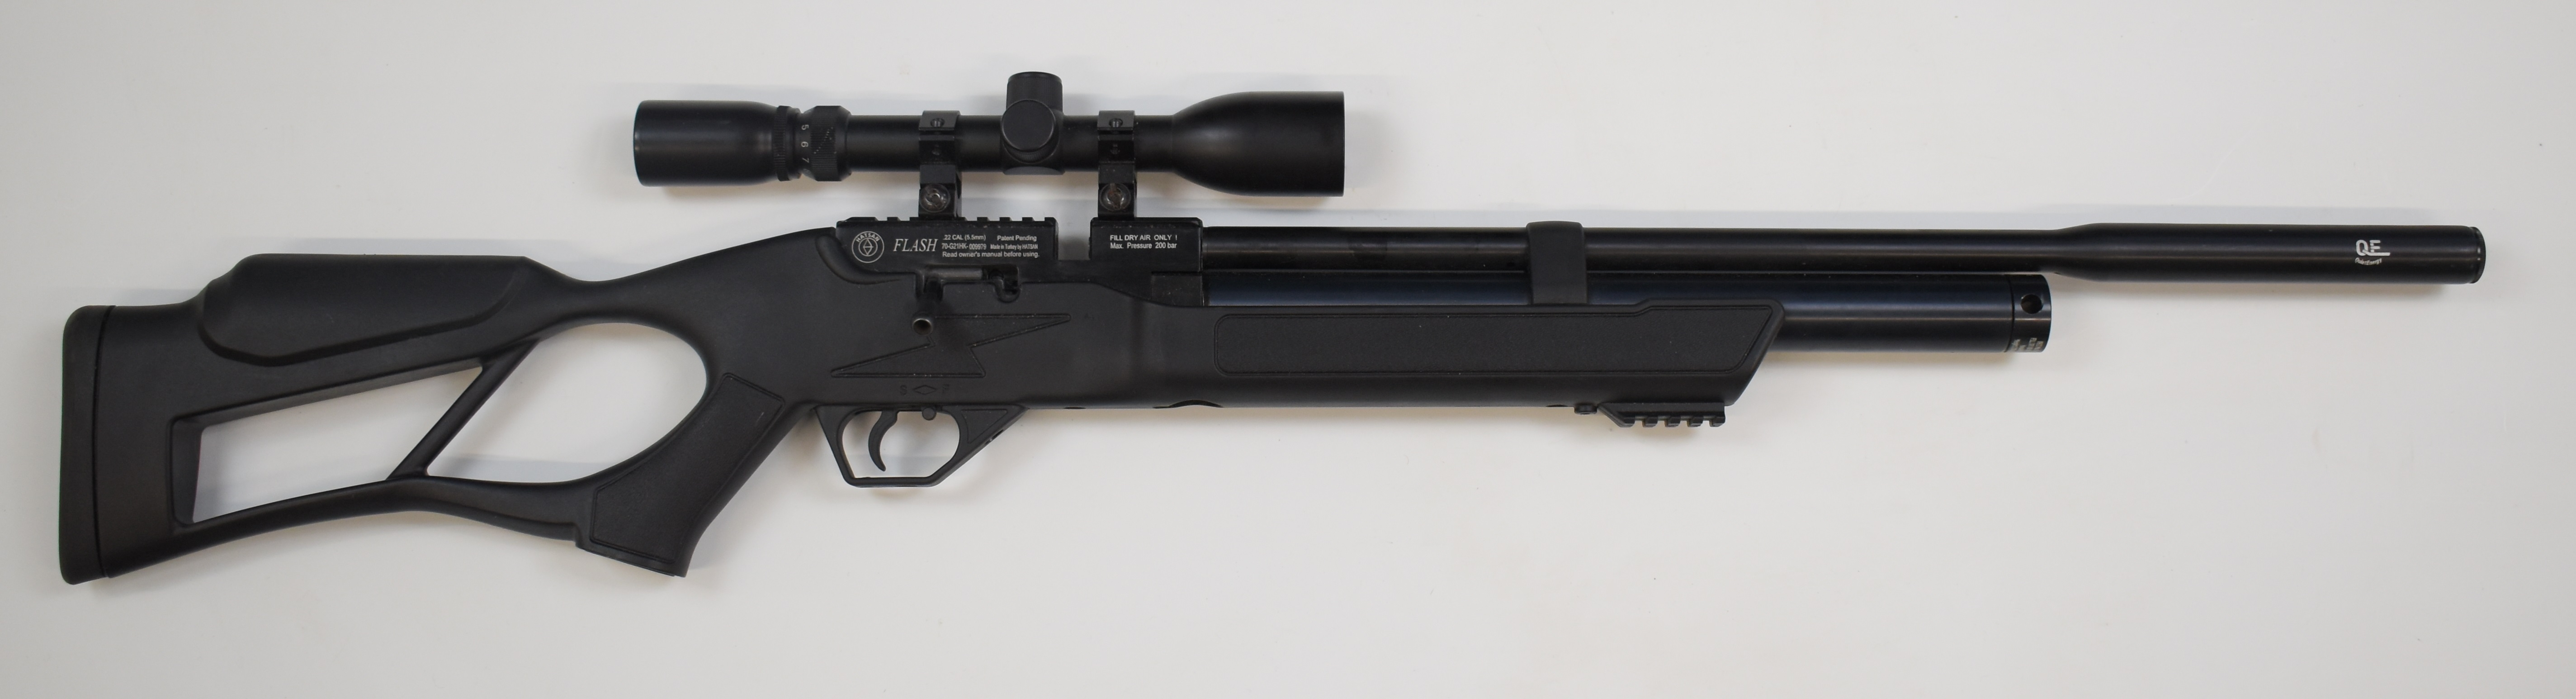 Hatsan Flash .22 PCP air rifle with textured semi-pistol grip and forend, composite skeleton - Image 2 of 11